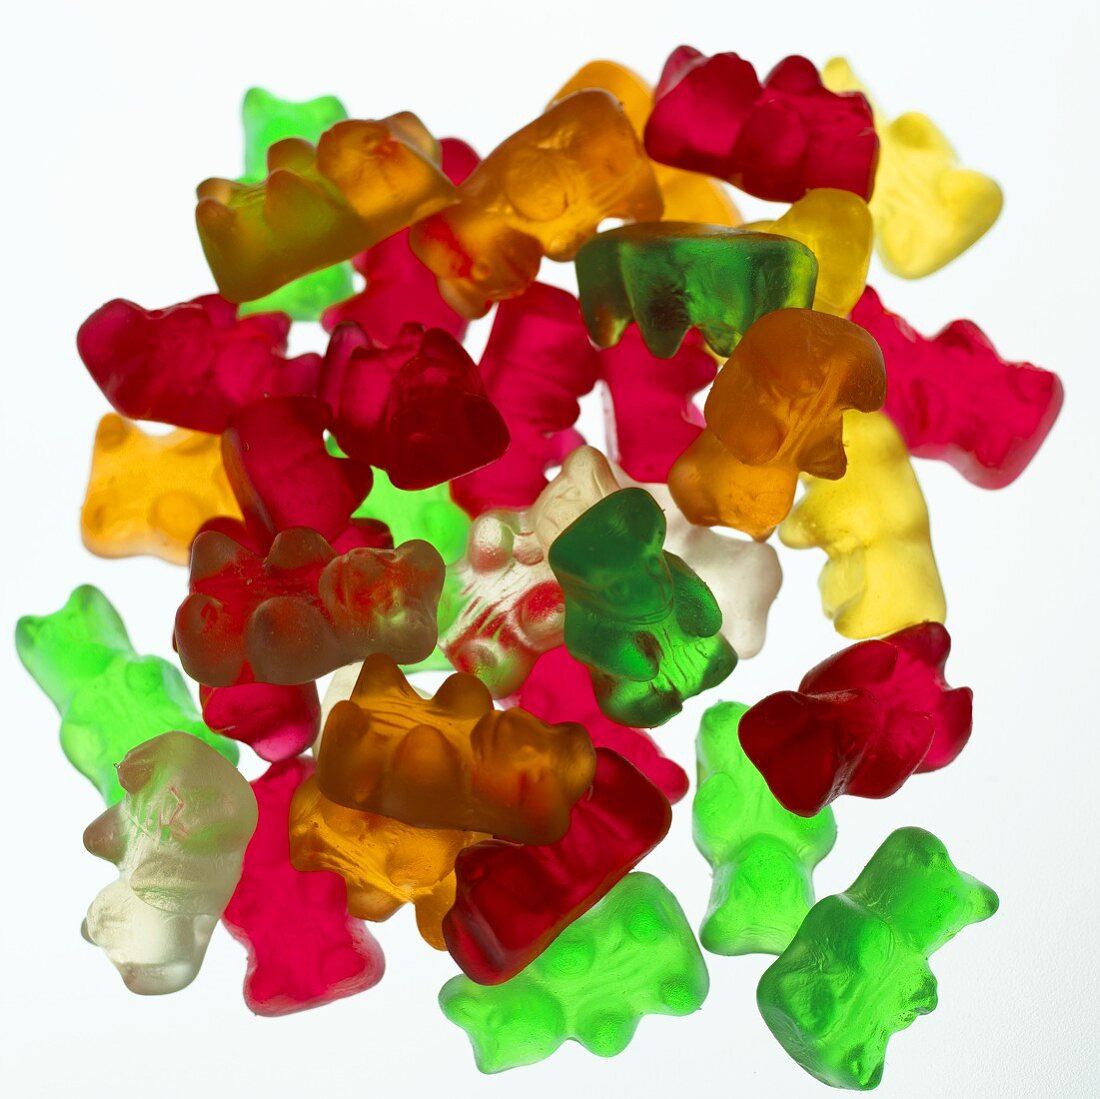 Gummi bears in assorted colours